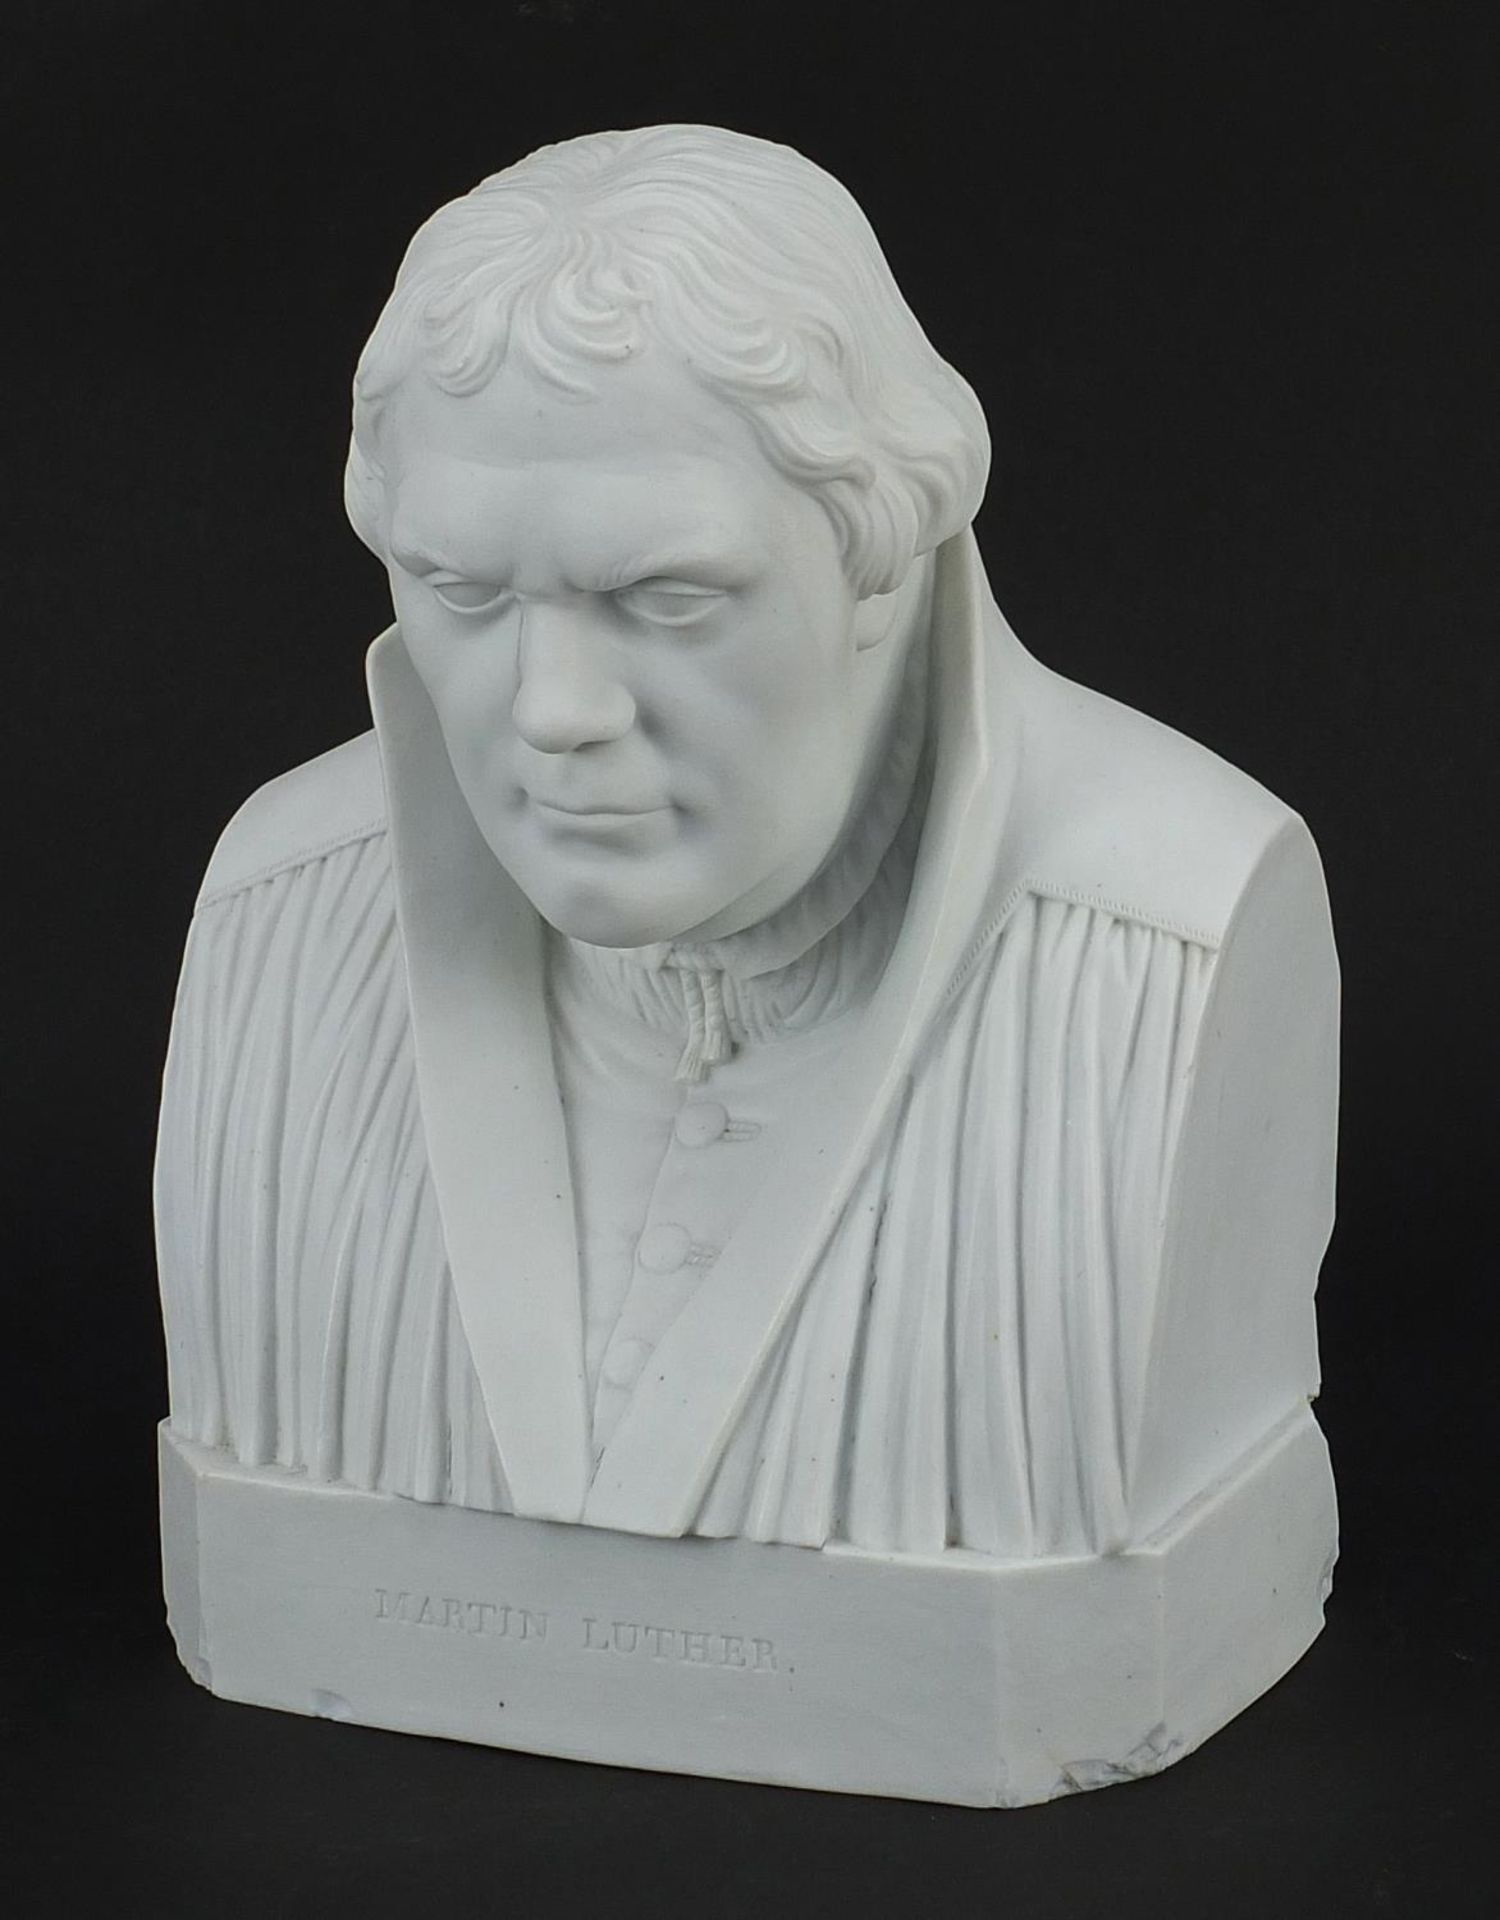 19th century continental parian ware bust of Martin Luther, blue crossed sword marks and impressed